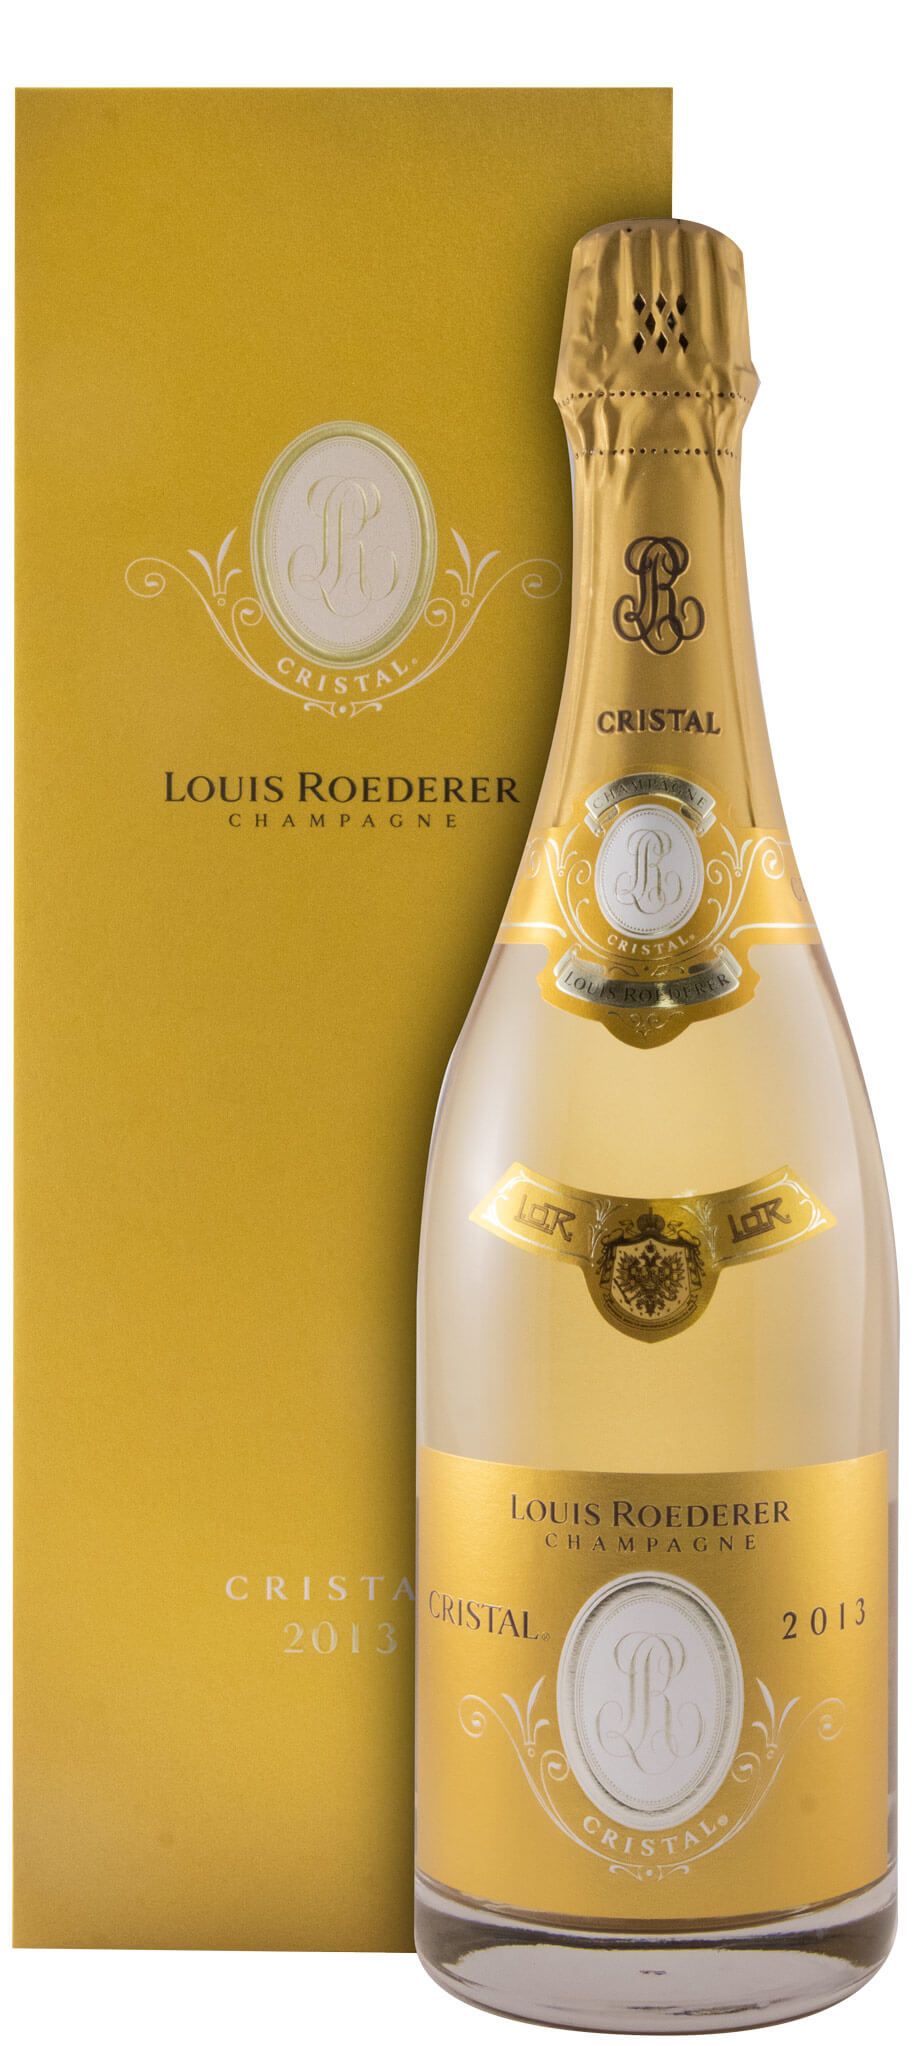 Louis Roederer Cristal Champagne 2013